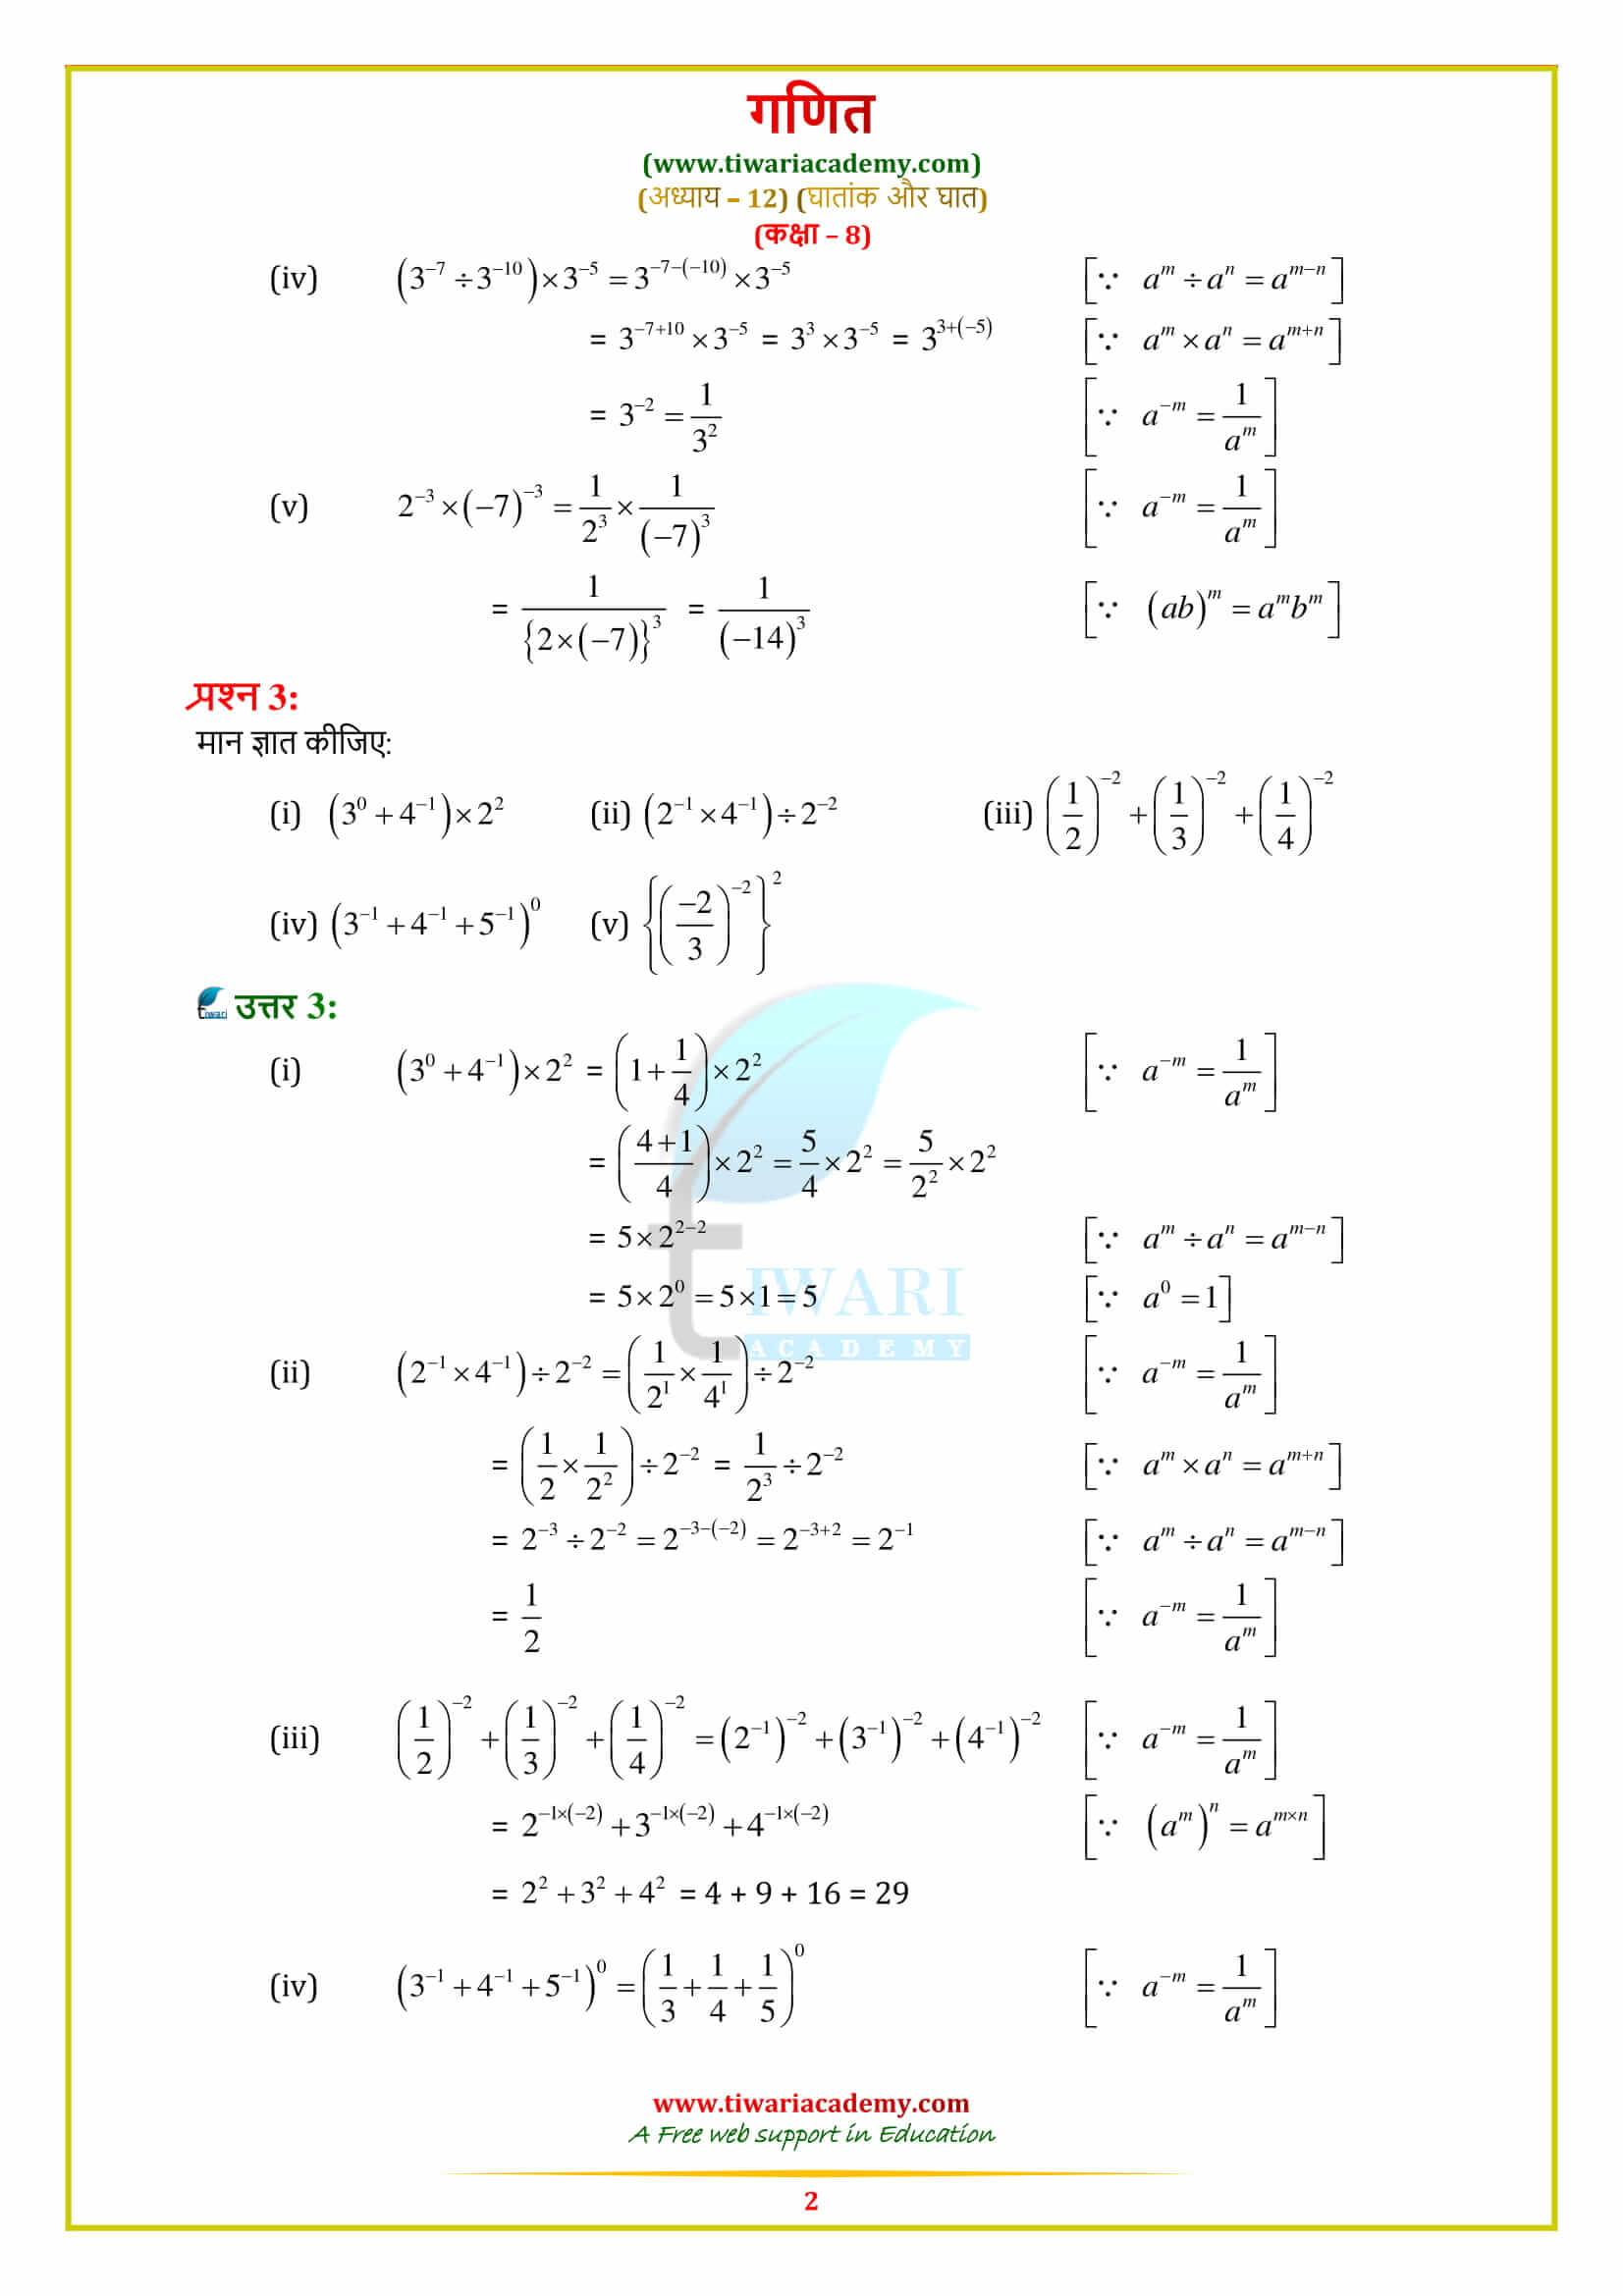 8 Maths Exercise 12.1 solutions in pdf form free download